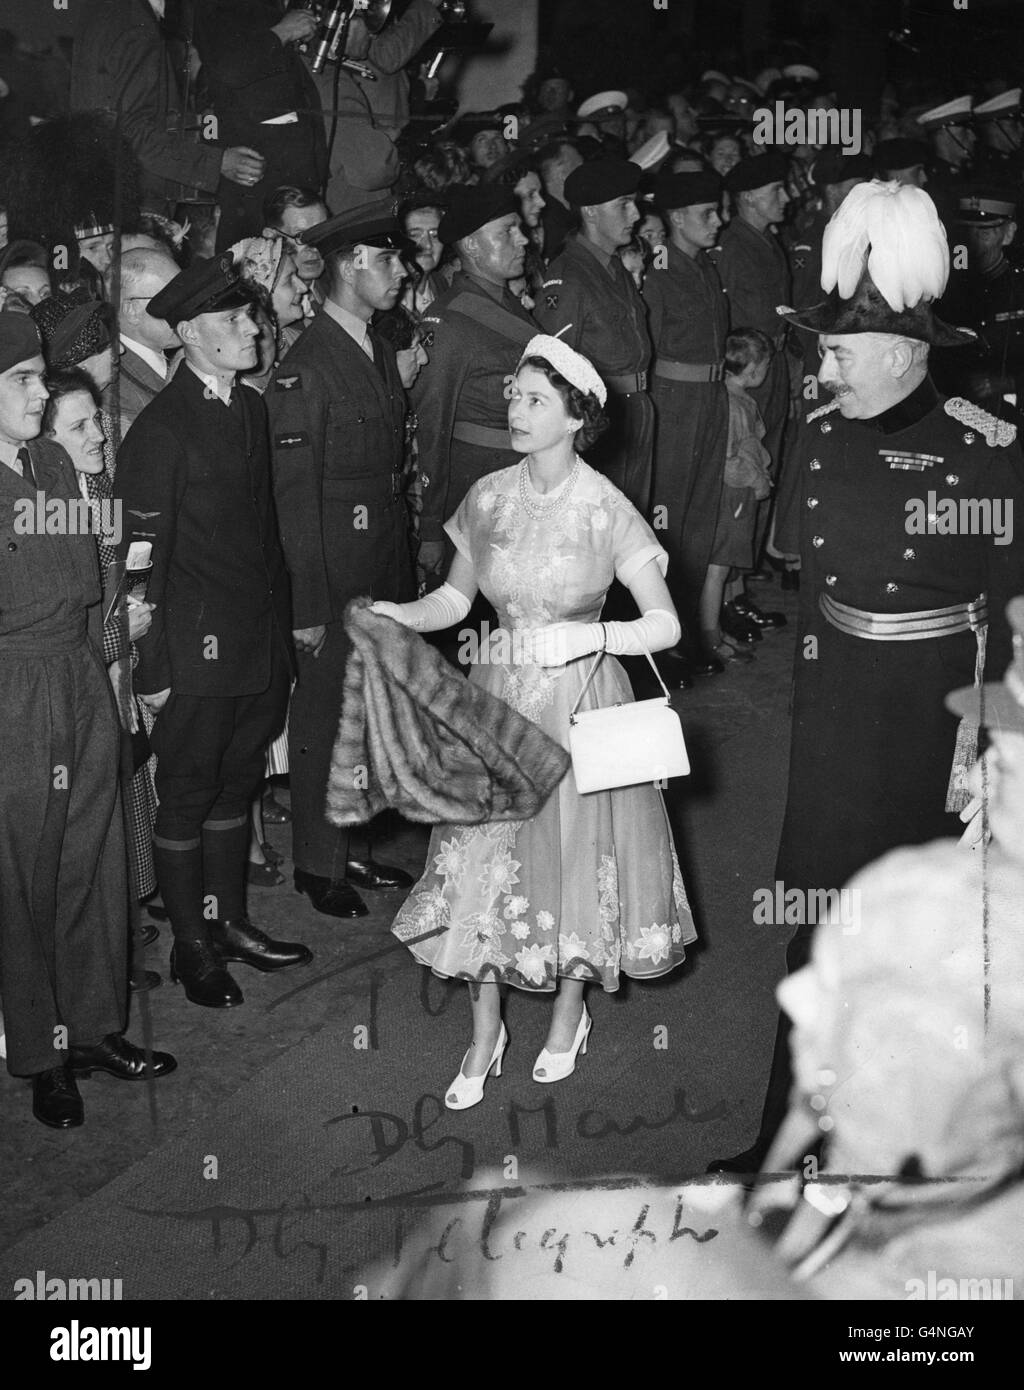 Queen Elizabeth II, escorted by Major-General J.A Gascoigne, arrives at Earl's Court, London, to attend the opening of the Royal Tournament. Stock Photo